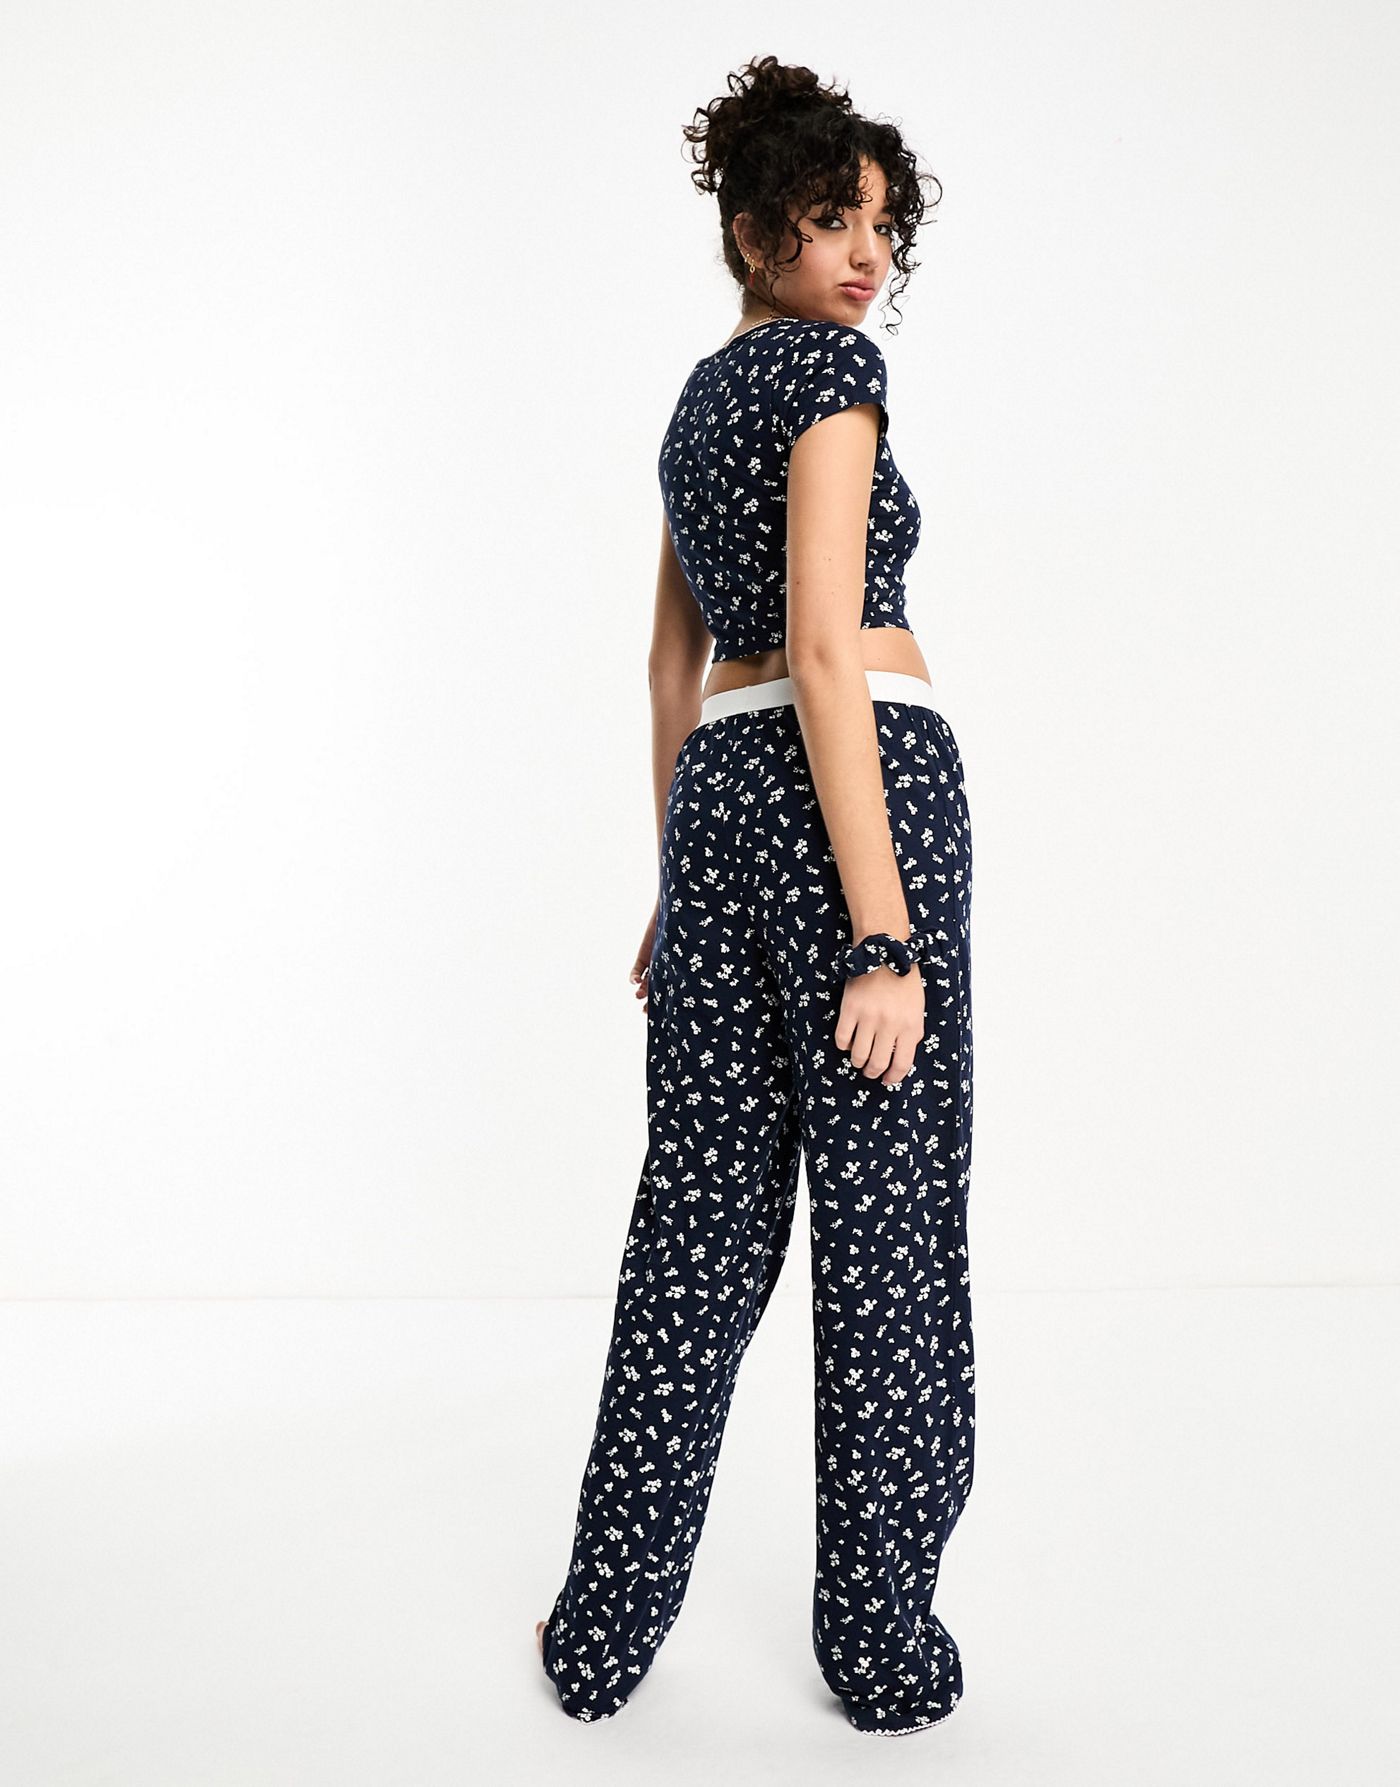 ASOS DESIGN Tall mix & match ditsy print pyjama trouser with exposed waistband and picot trim in navy